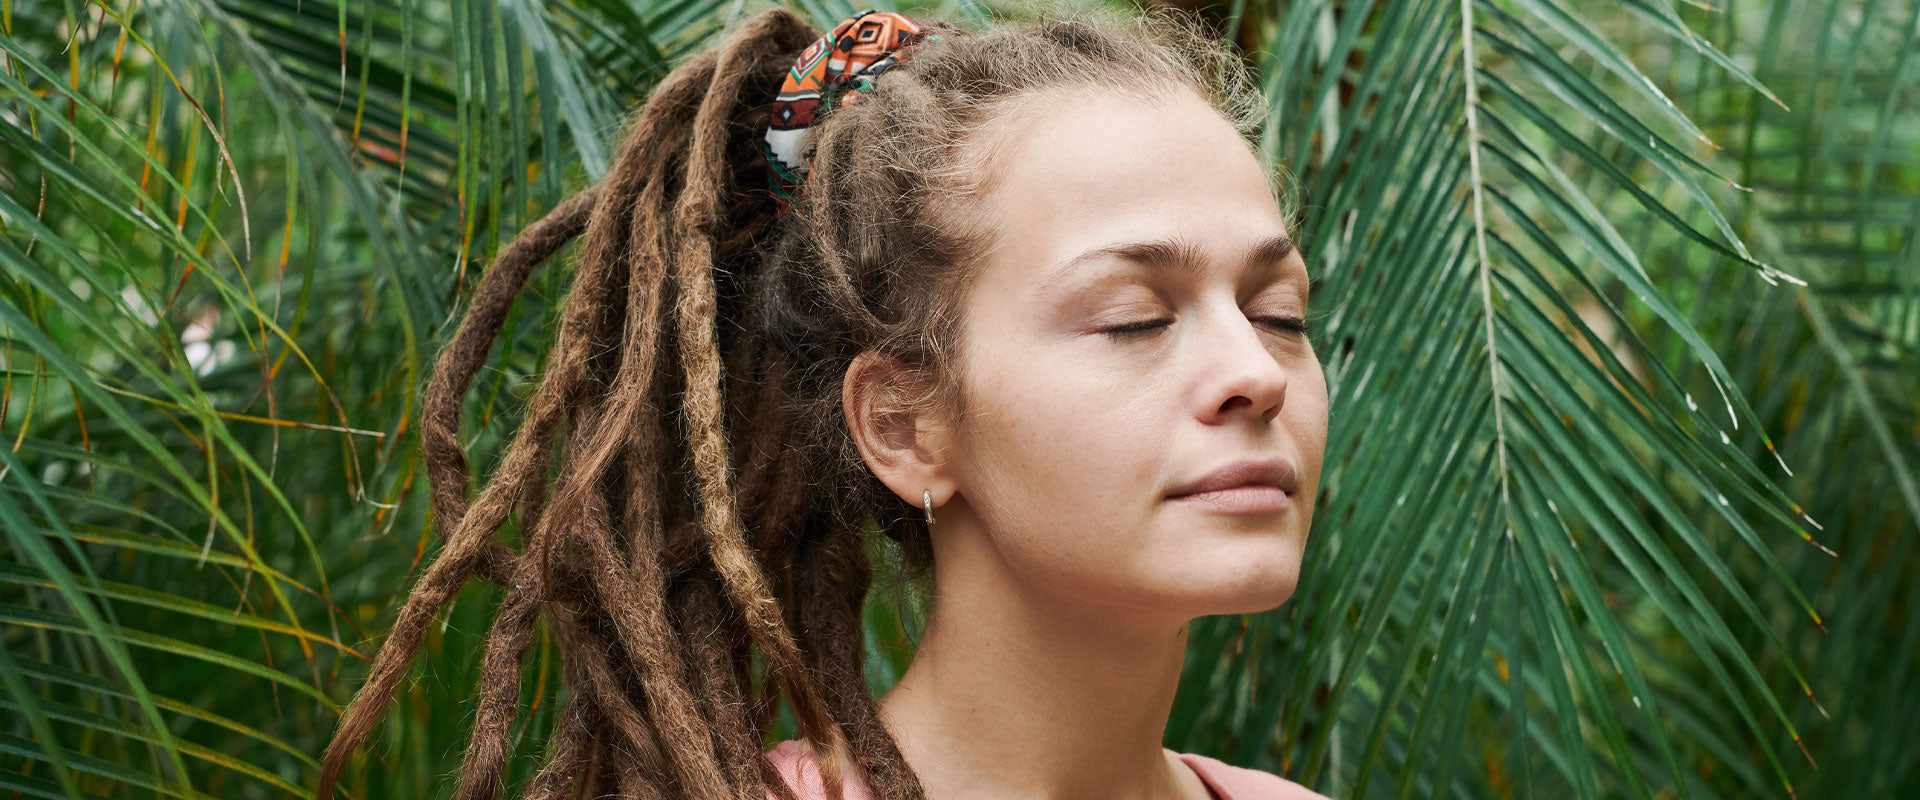 5 Best Hair Ties for Dreads: Top Picks for Secure Hold & Style